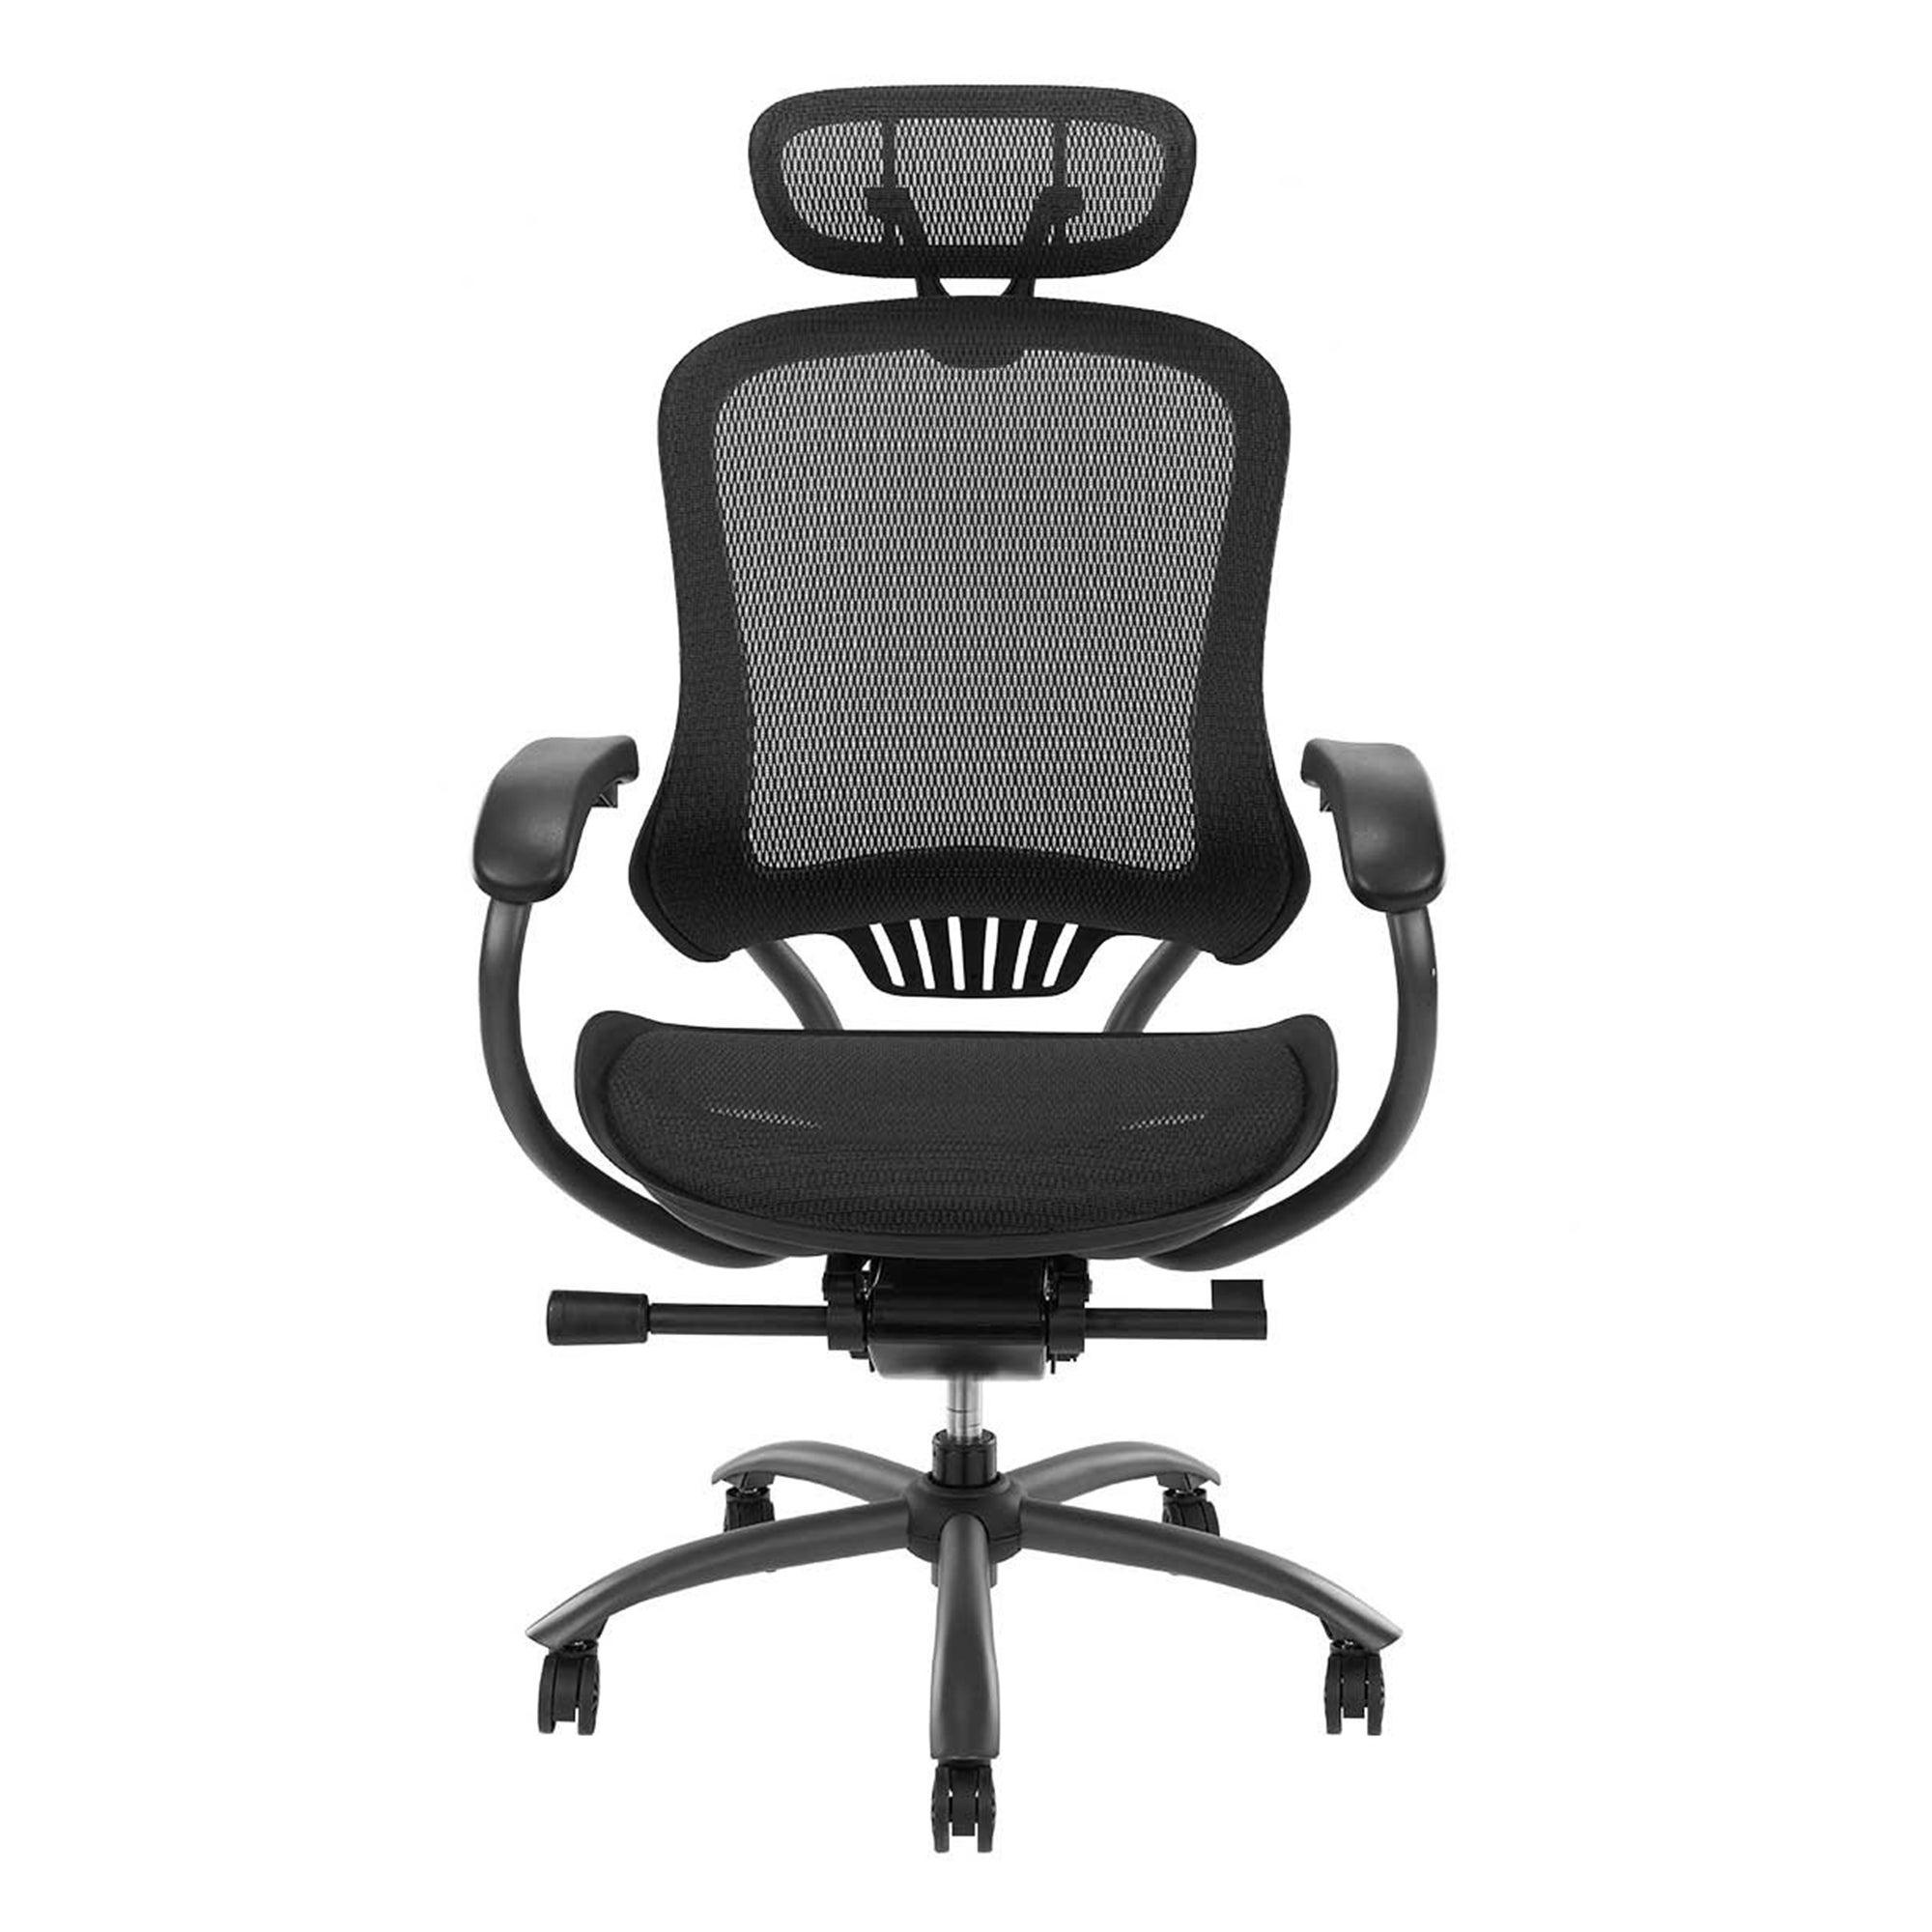 Adjustable Ergonomic Office Executive Chair With Removable Headrest